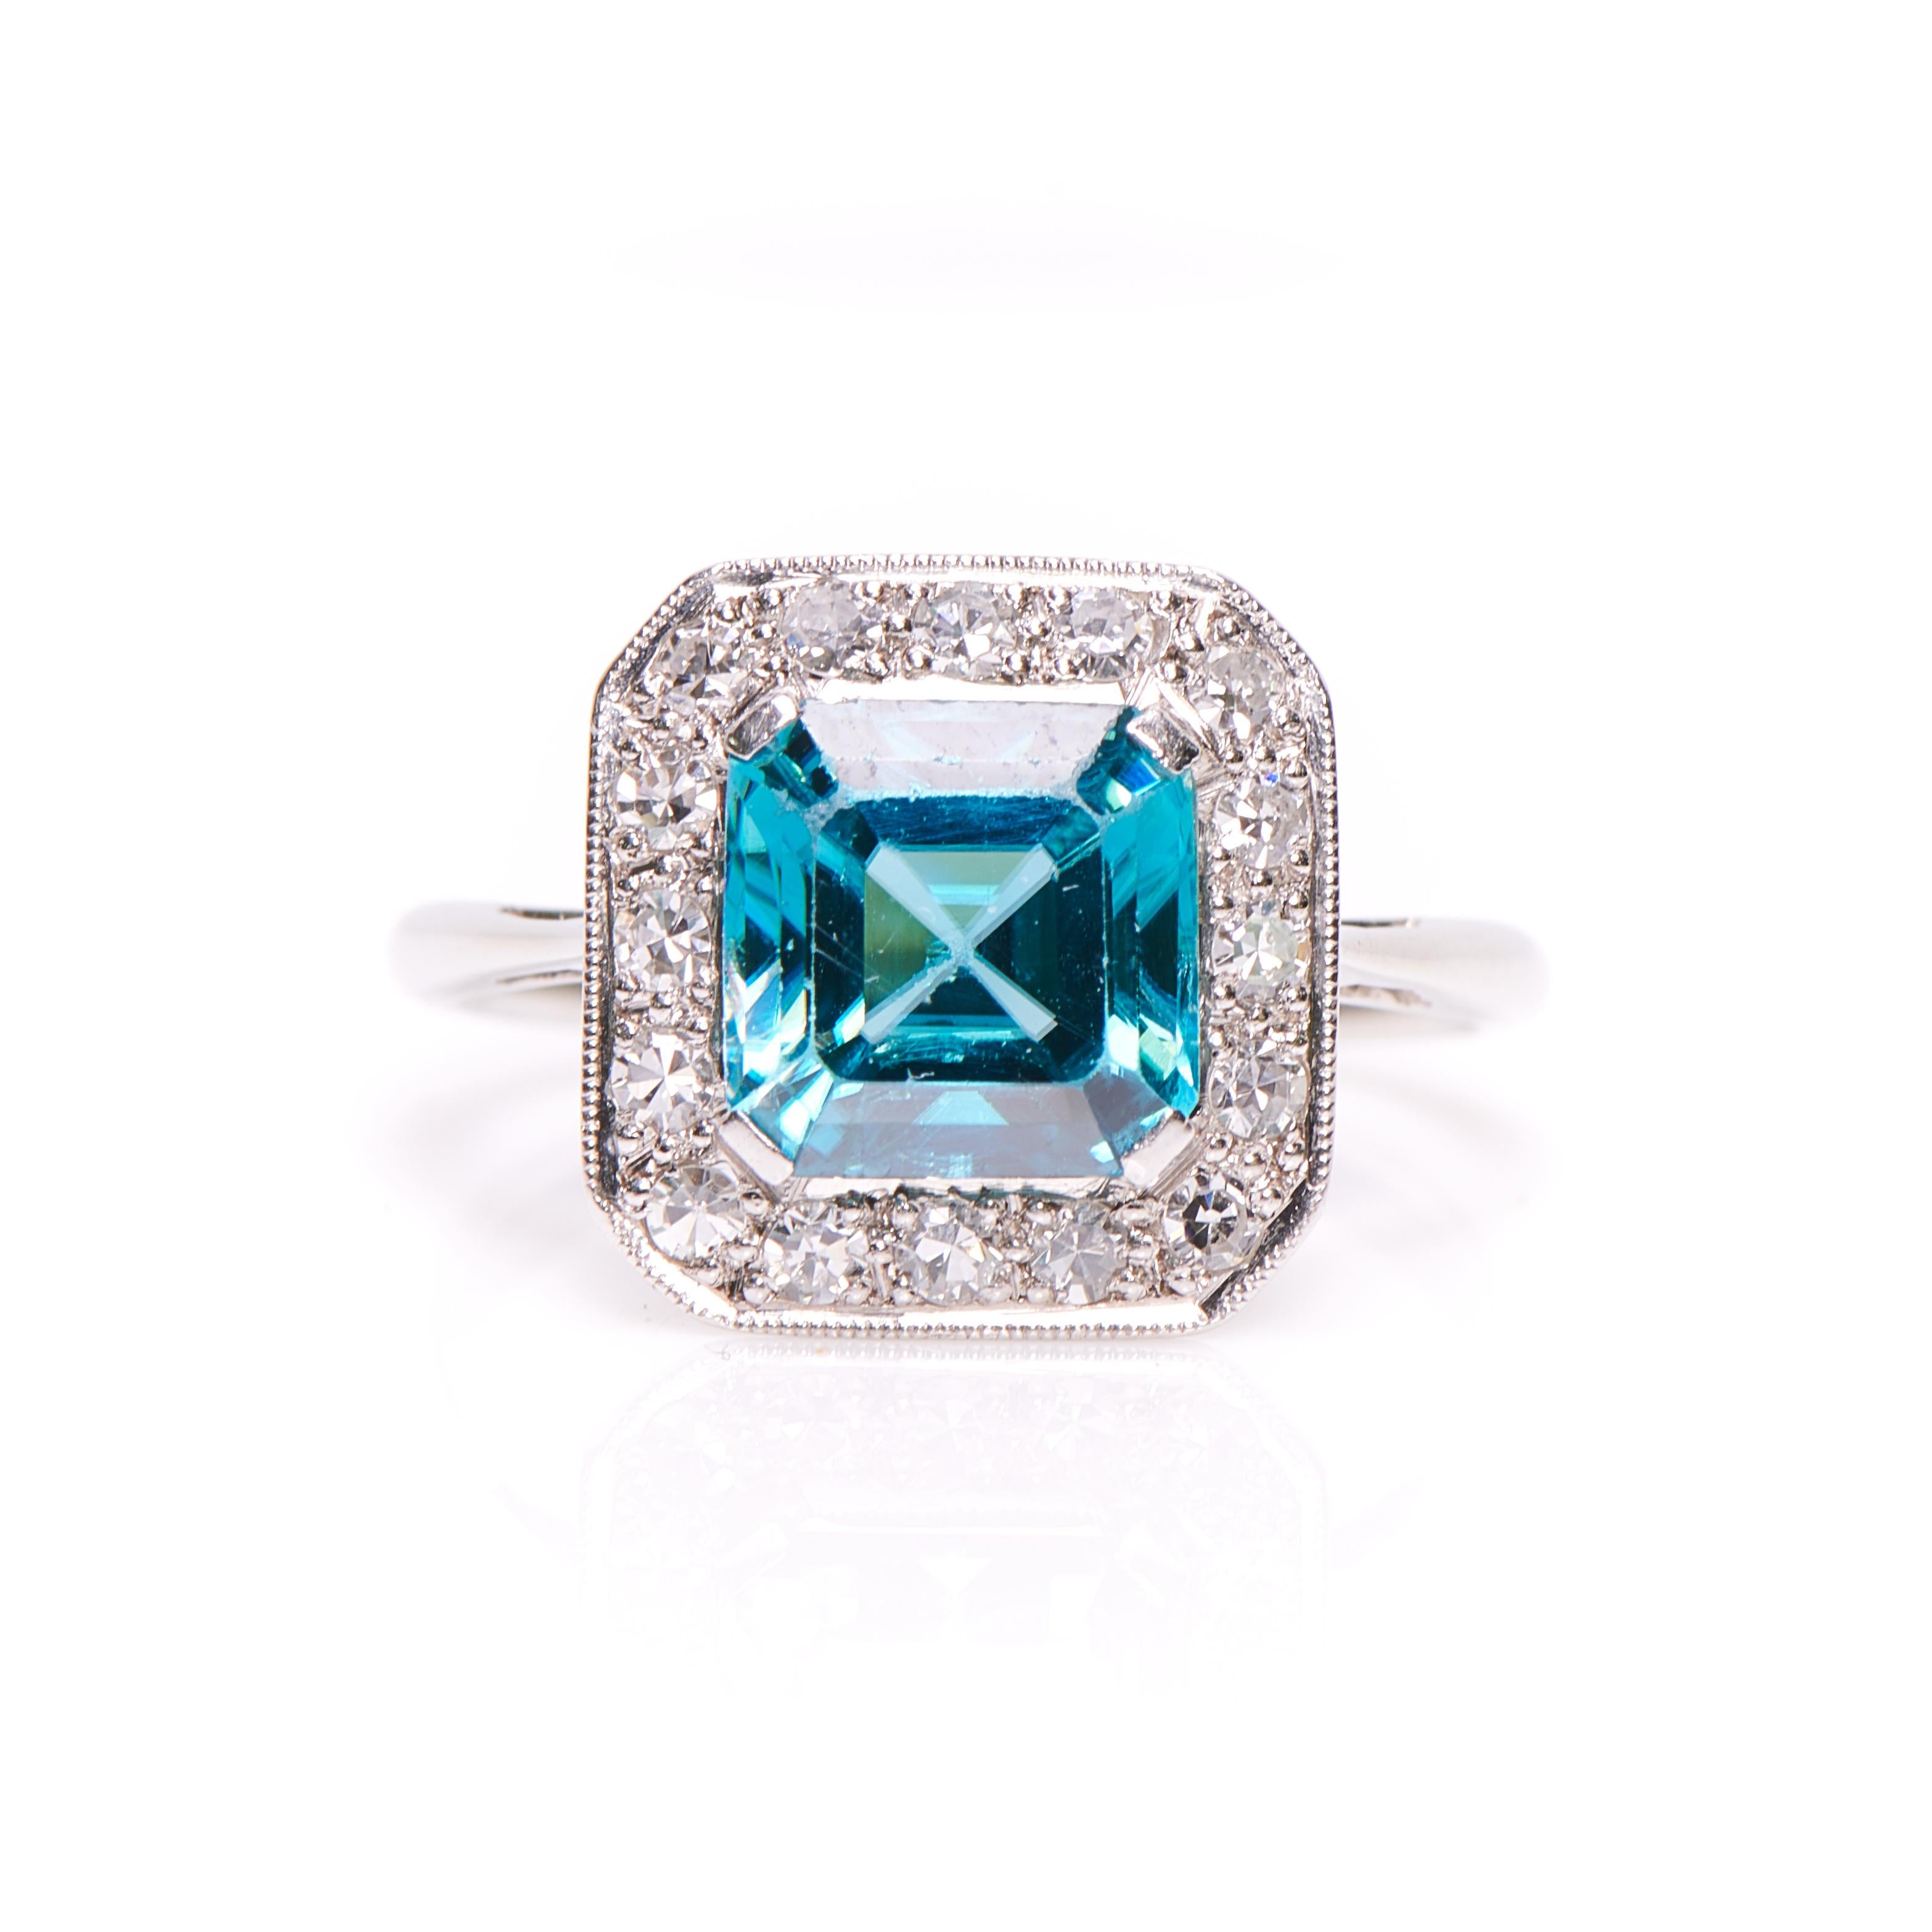 A swimming-pool blue zircon sits at the centre of this ring. Among the most fiery stones available to traditional jewellers, zircons were long regarded as second only to diamonds for their sparkling lustre and dazzling dispersion, and treasured in